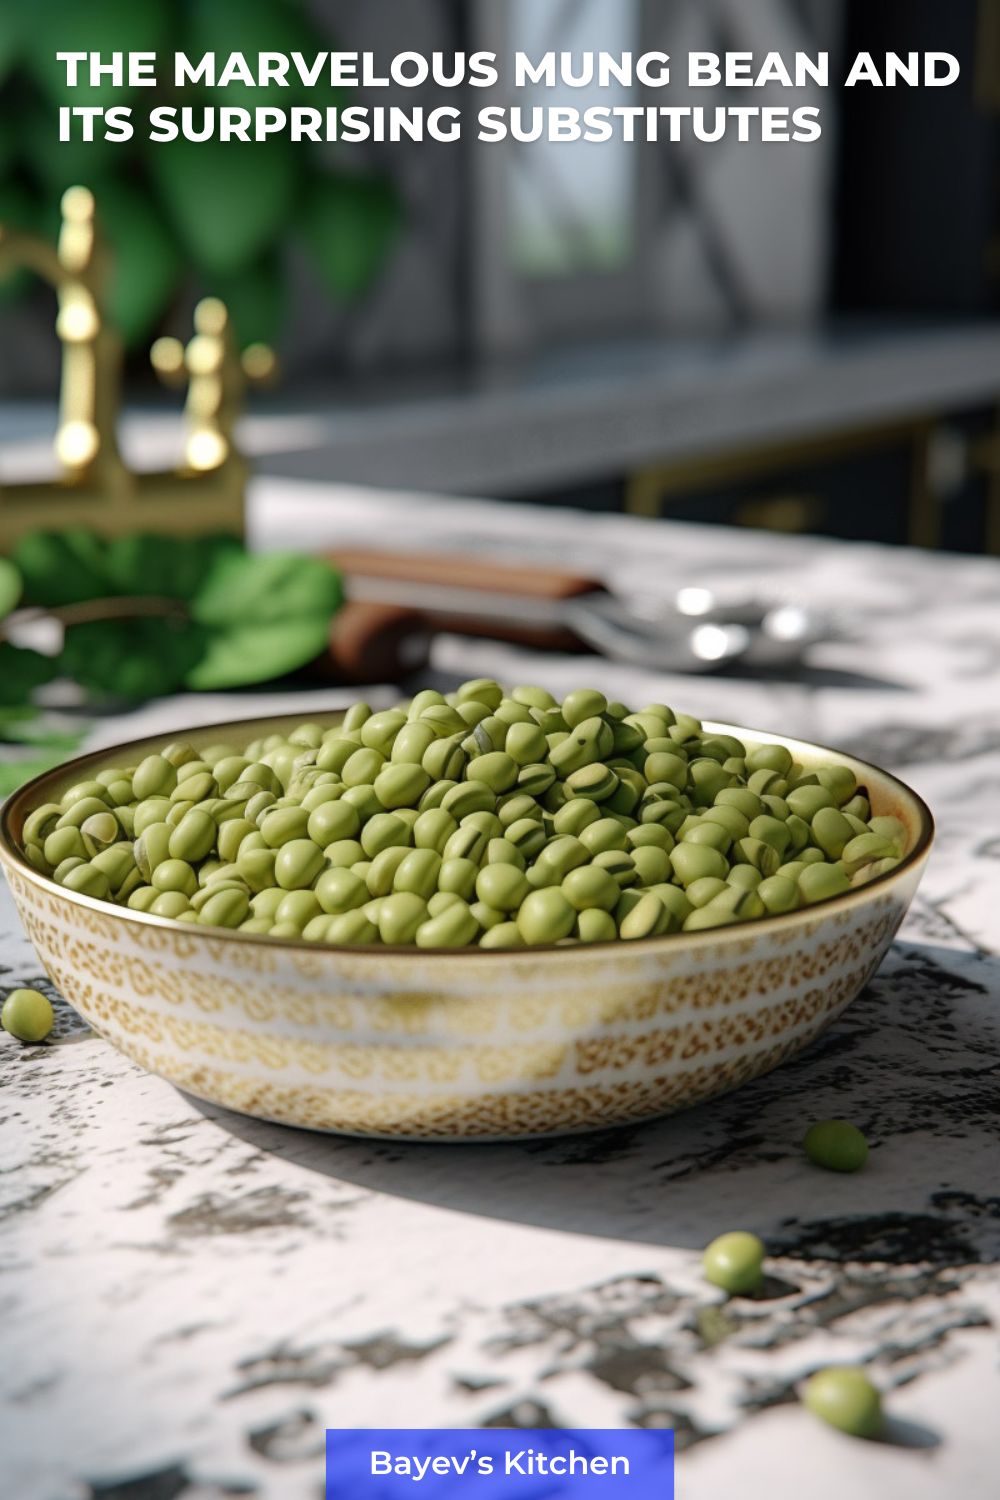 The Marvelous Mung Bean and Its Surprising Substitutes by bayevskitchen.com